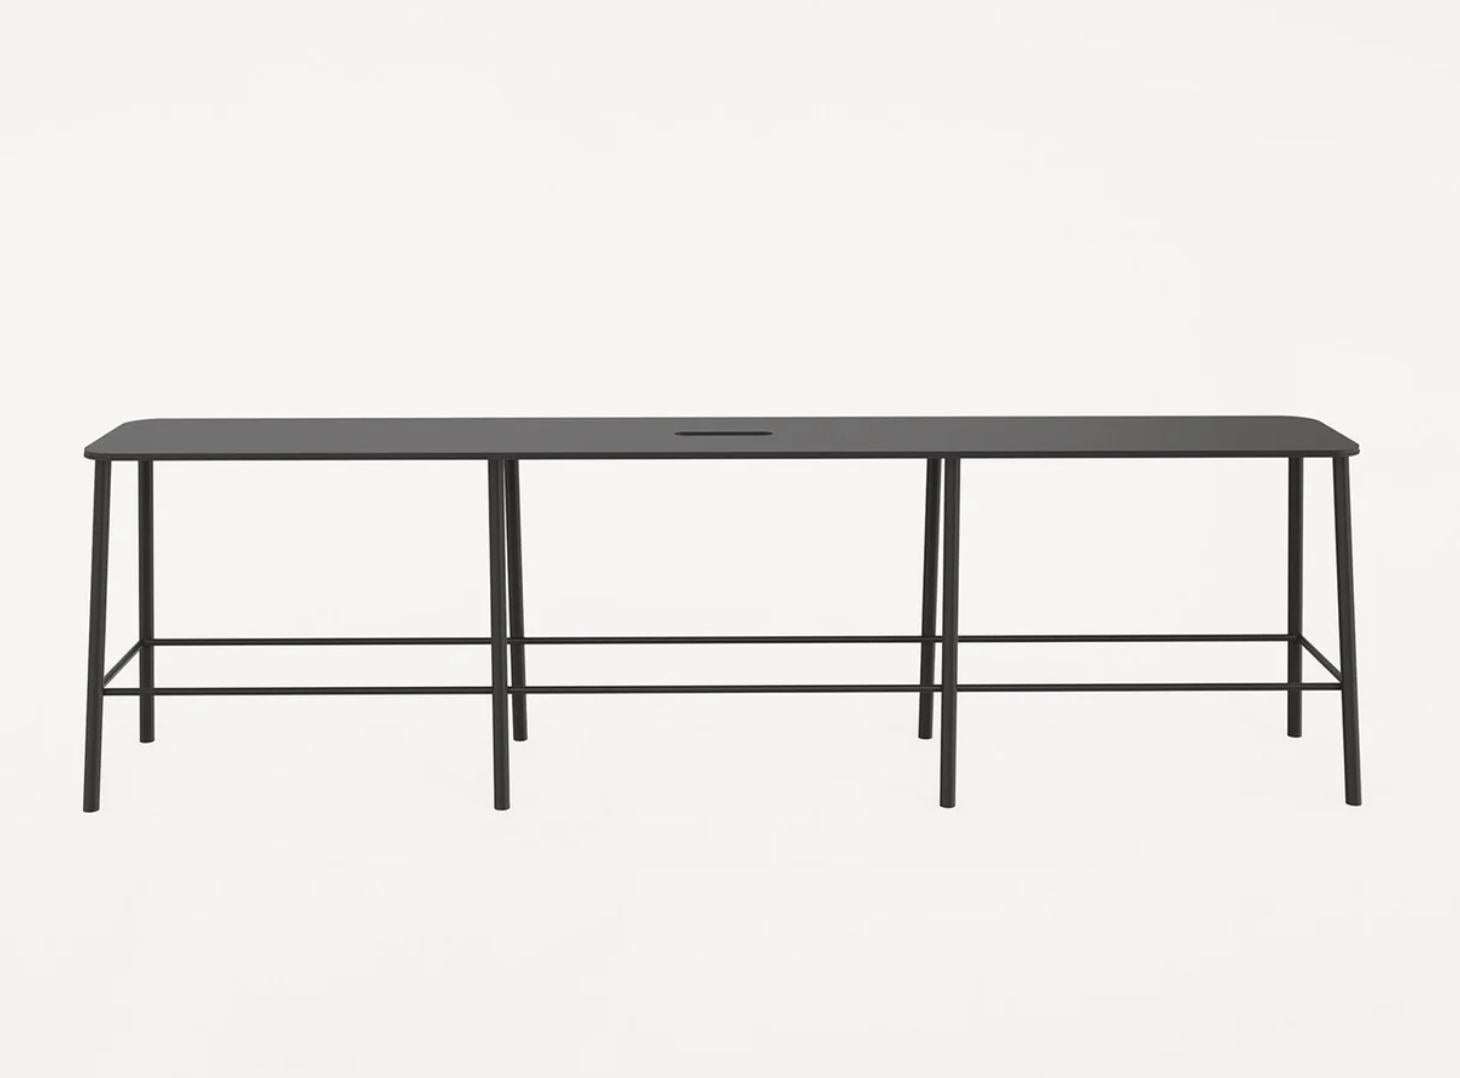 Adam bench is inspired by industrial design, an artist's studio, and a workshop. The functionality and simplicity of the design, combined with strong materials, give this bench a structural and utilitarian approach.

Features
– Suitable for